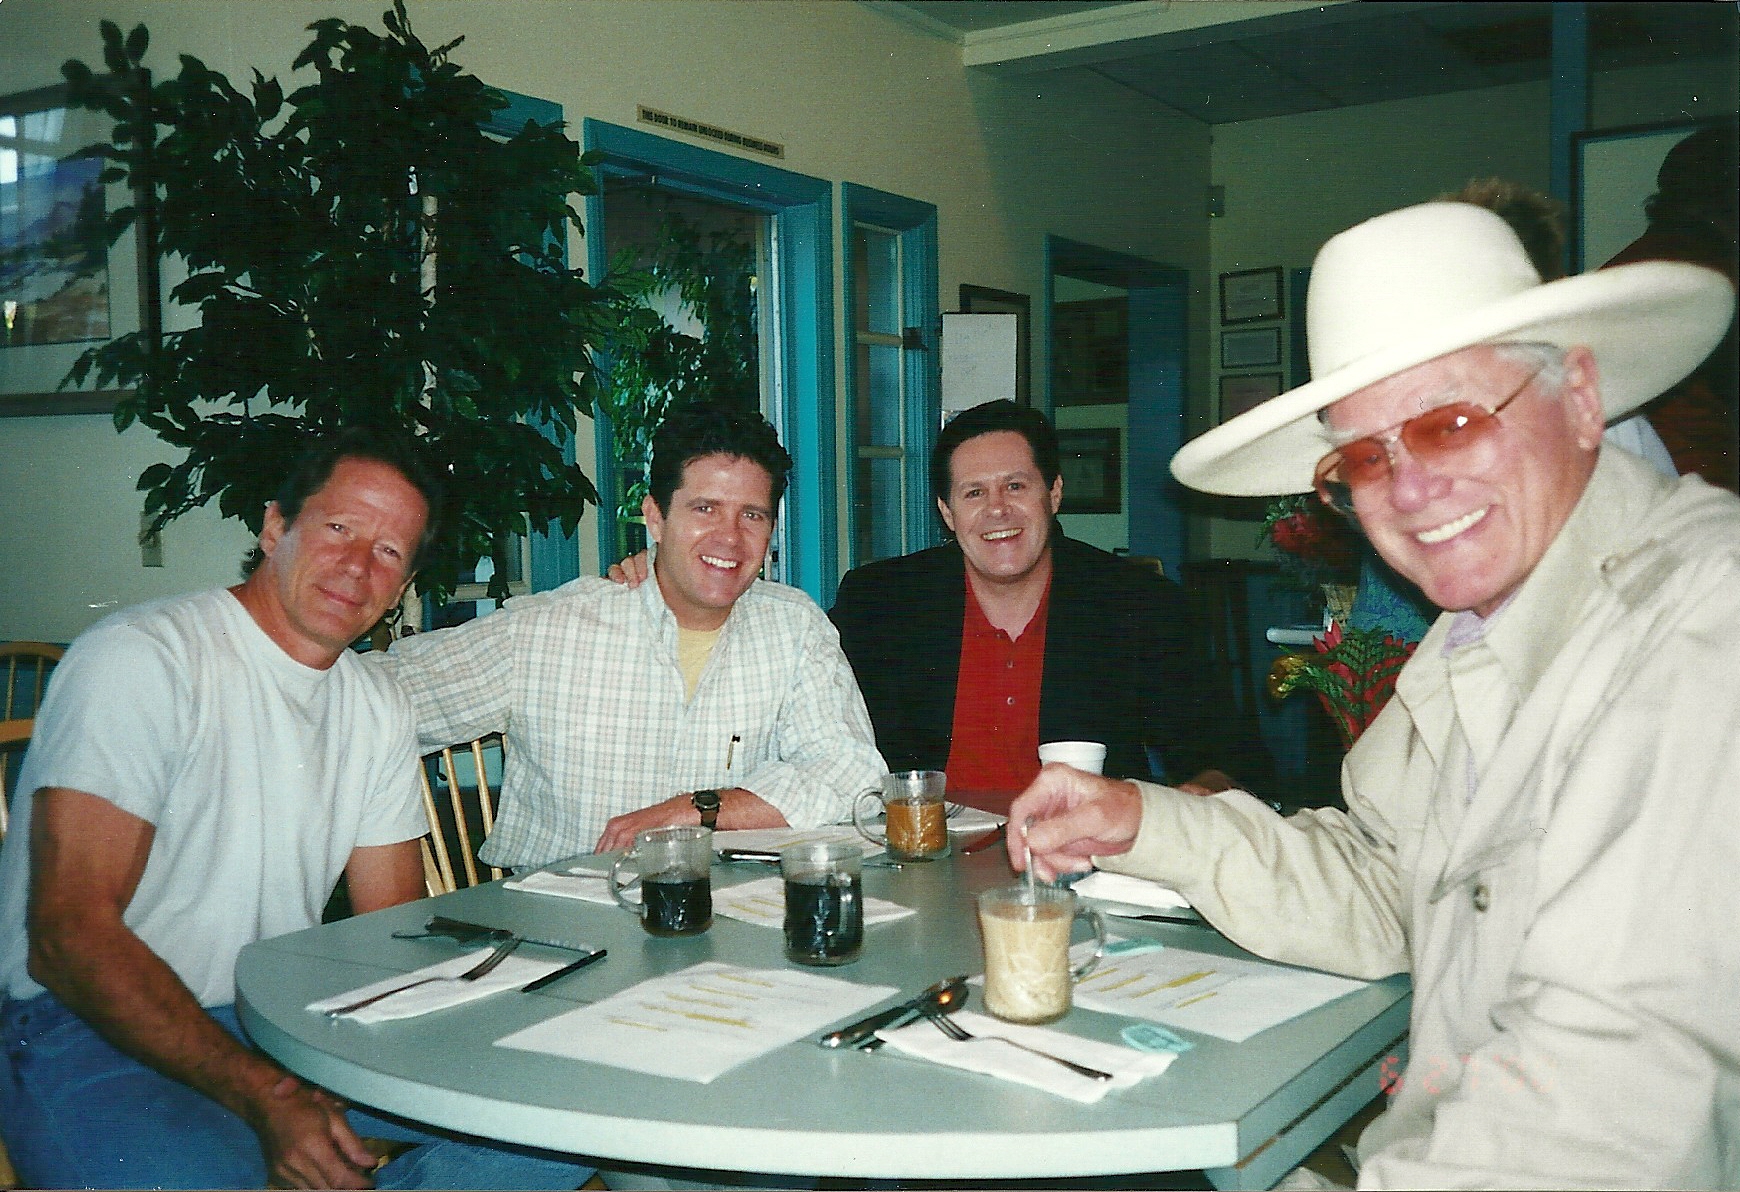 In Ojai with Larry Hagman and Peter Strauss.